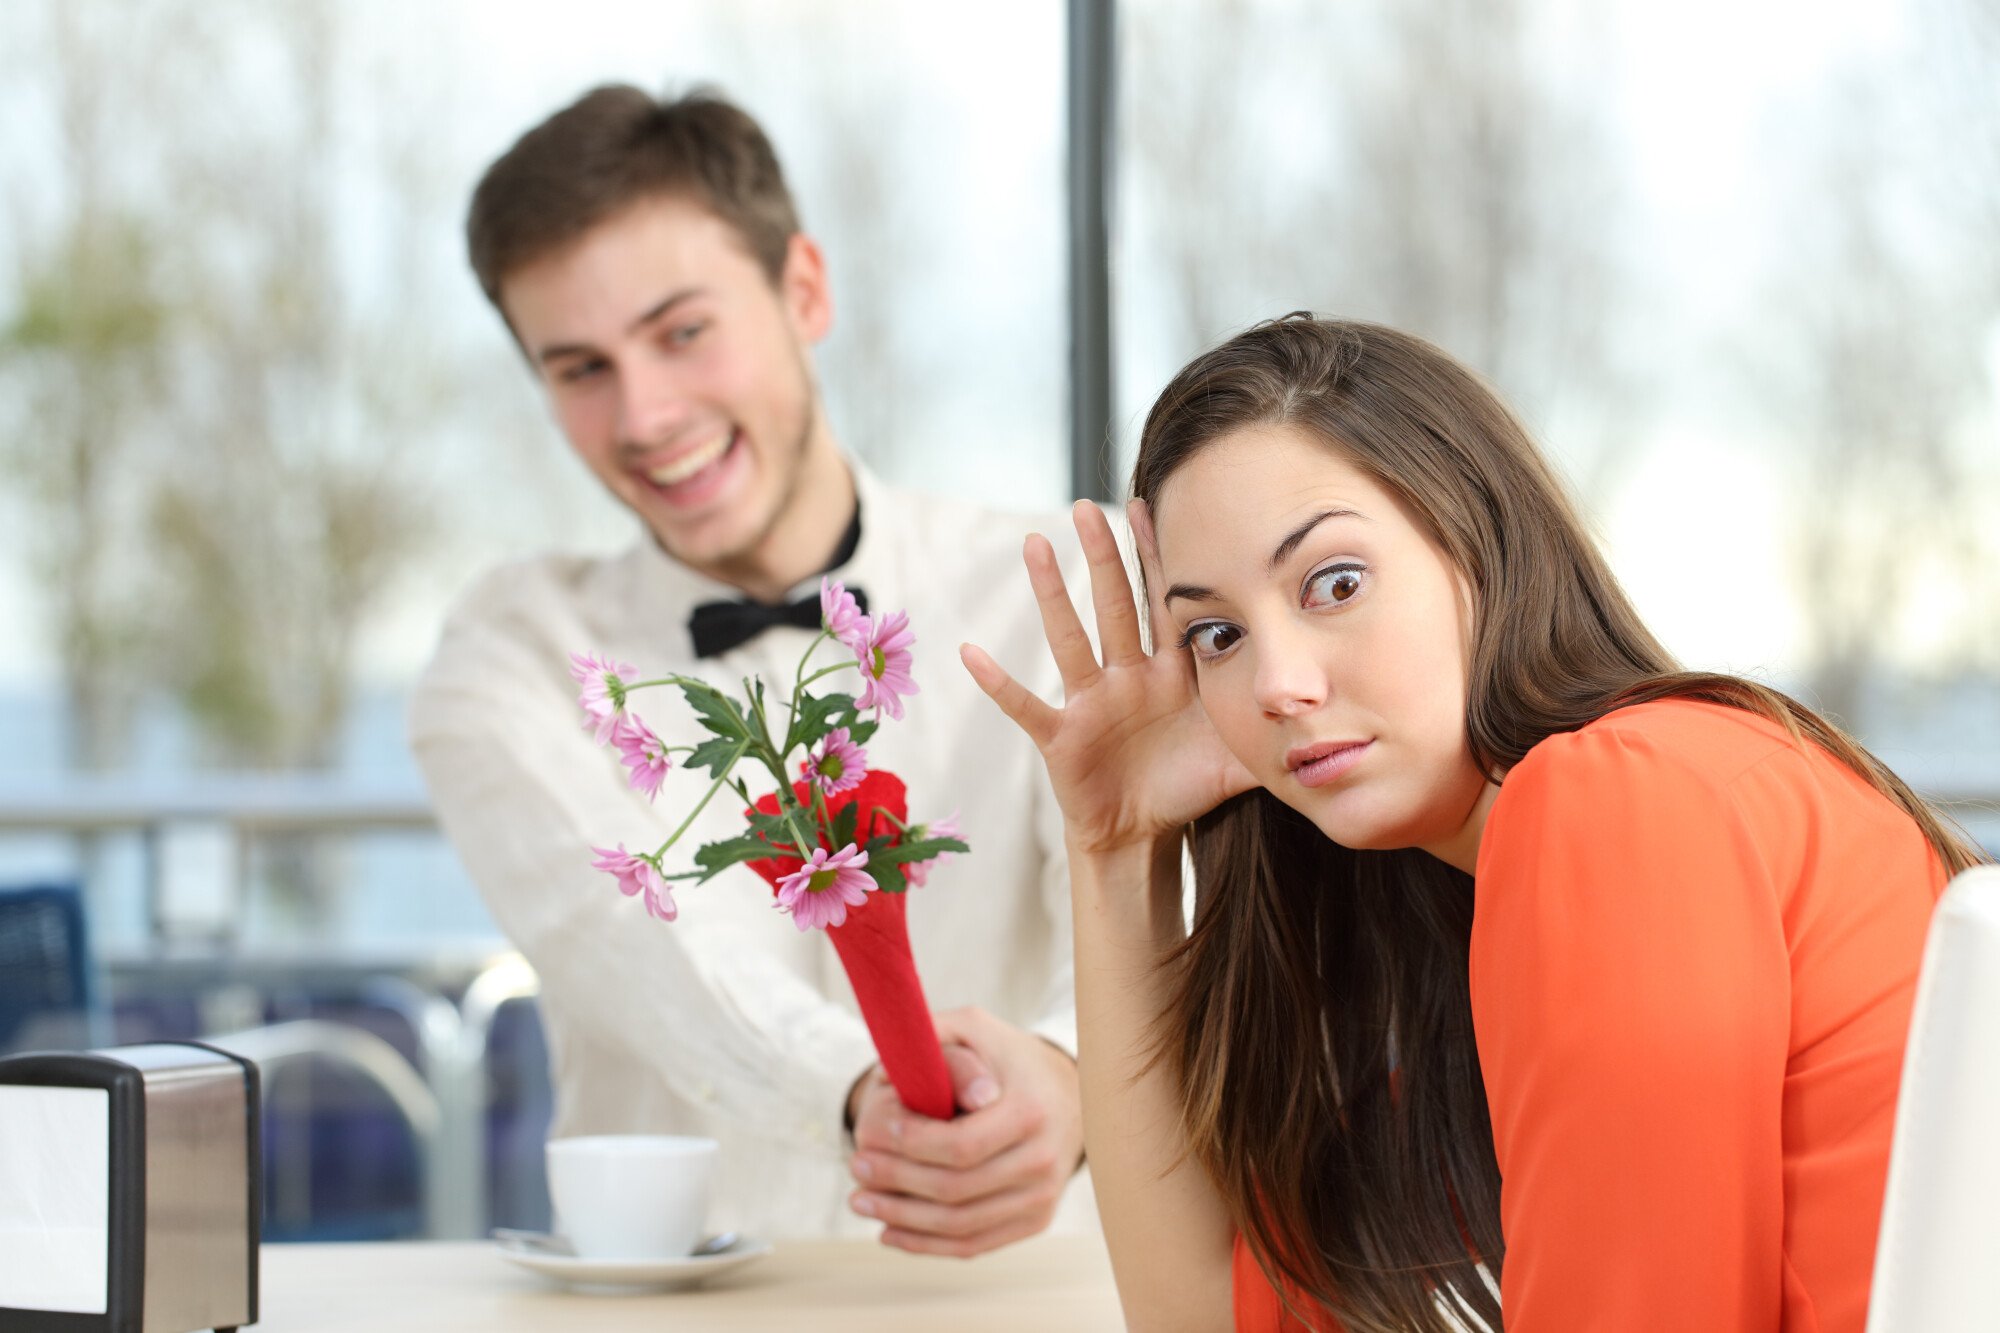 4 Common First Date Mistakes and How to Avoid Them